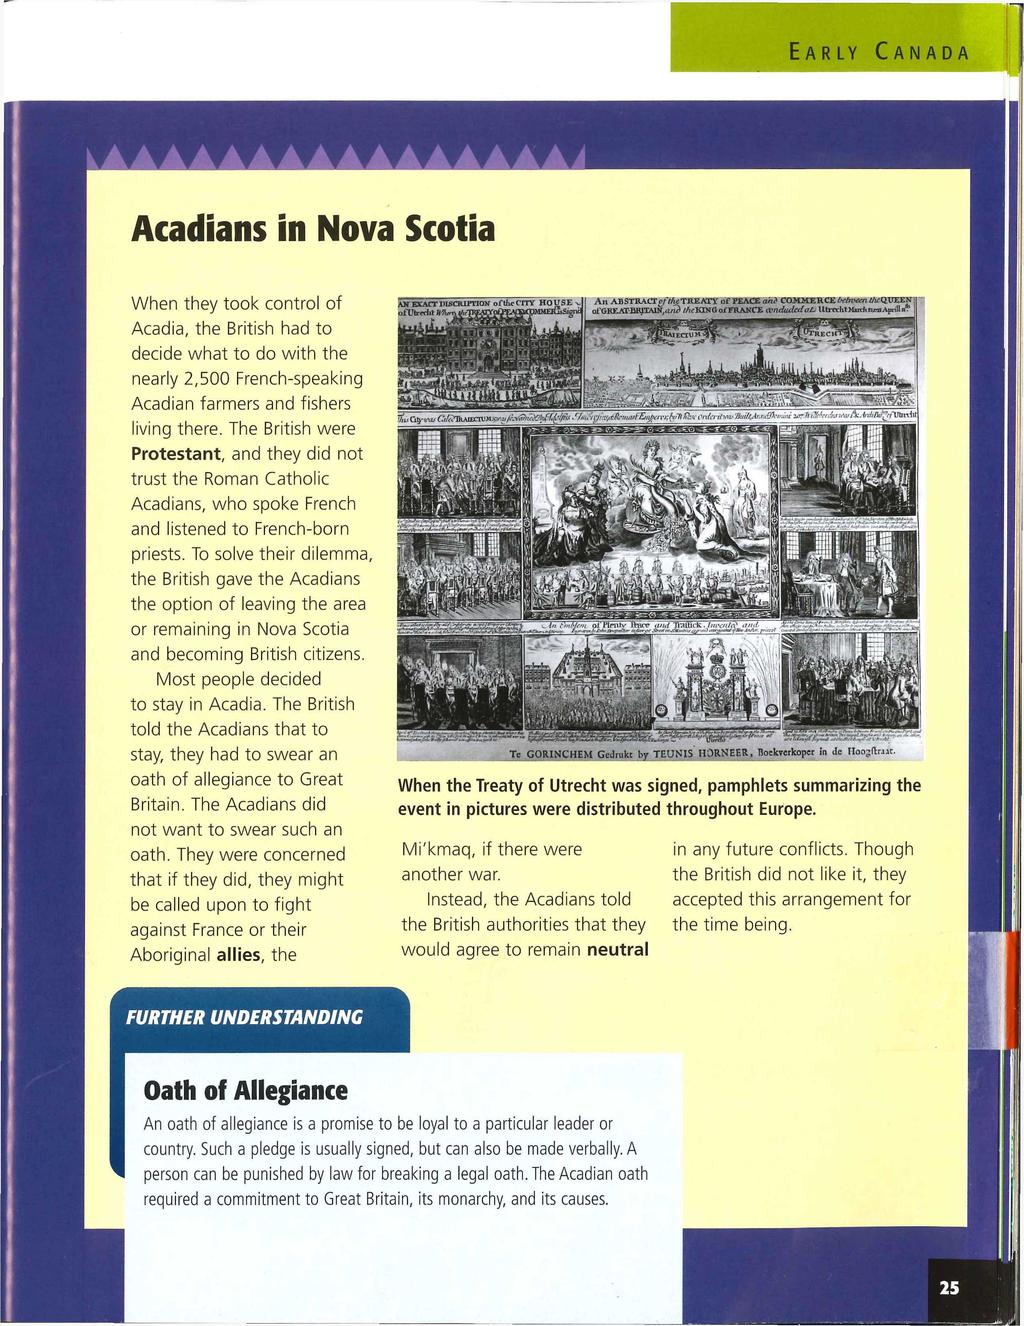 Acadians in Nova Scotia When they took control of Acadia, the British had to decide what to do with the nearly 2,500 French-speaking Acadian farmers and fishers living there.